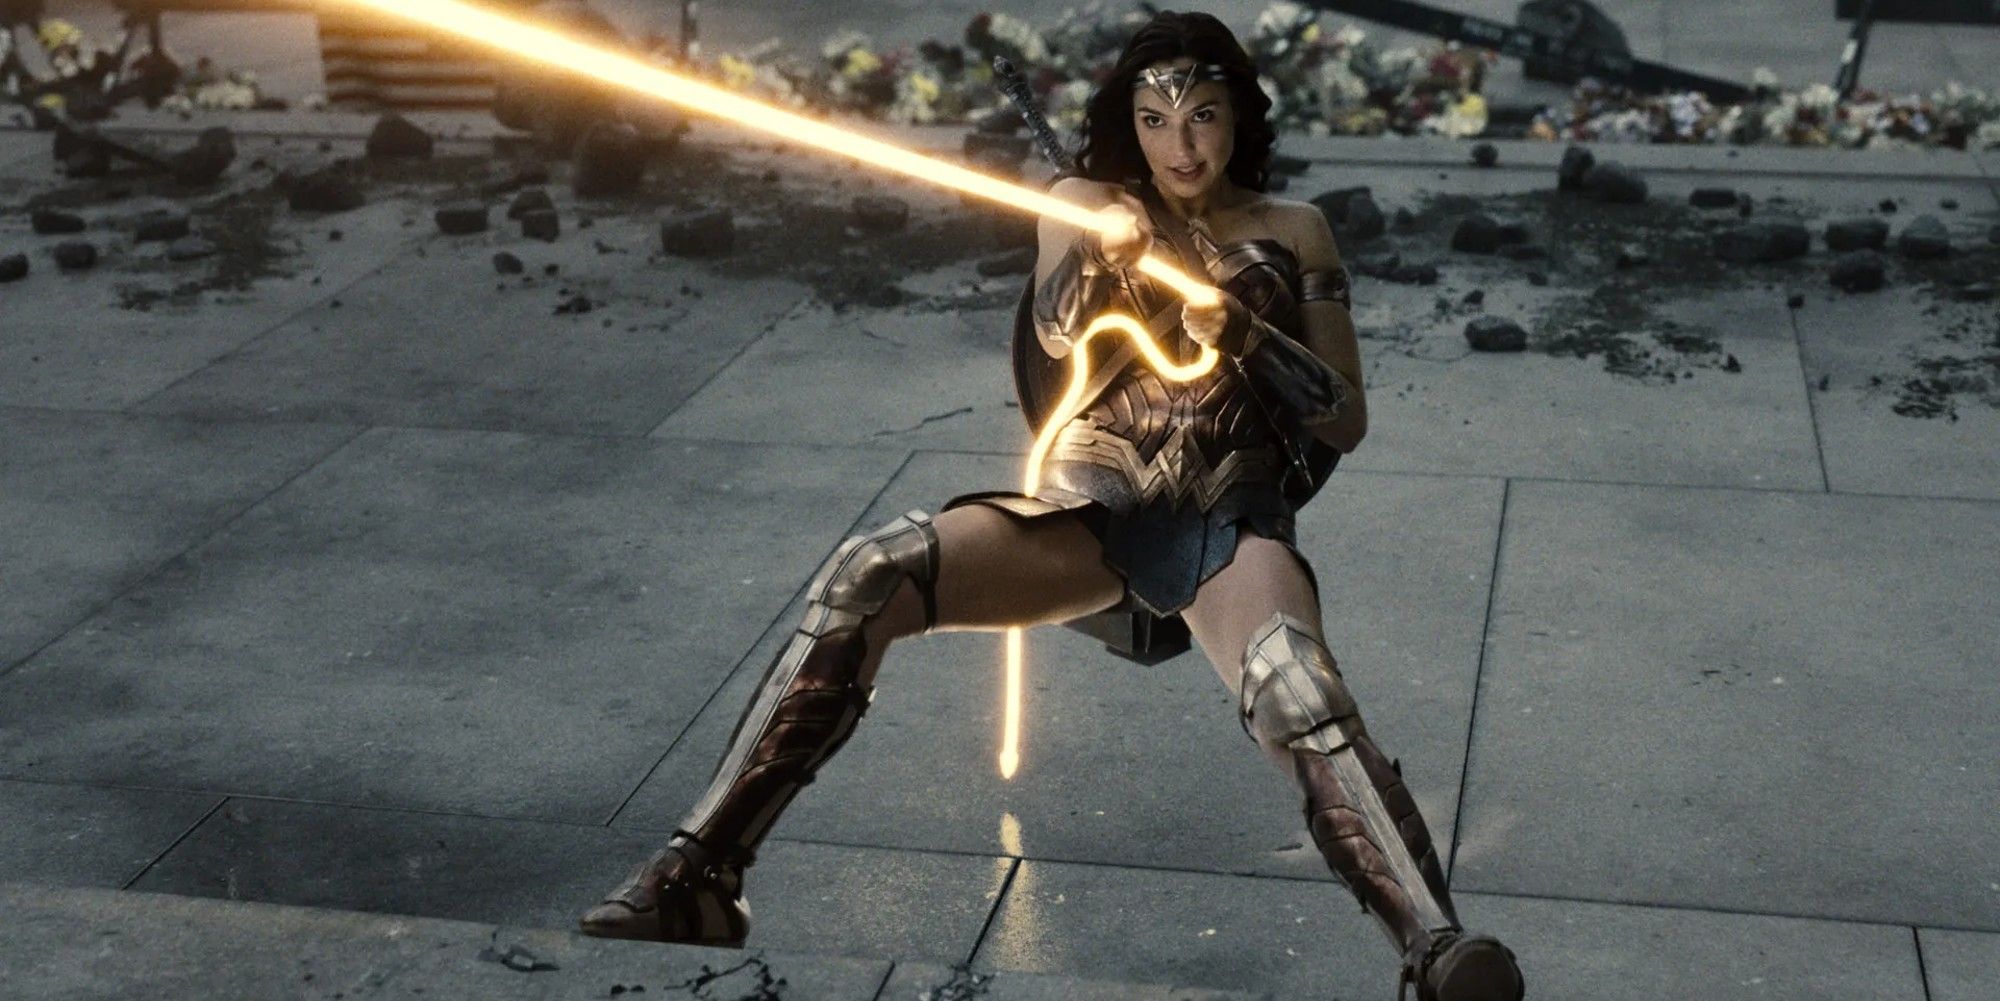 wonder woman using the lasso of truth